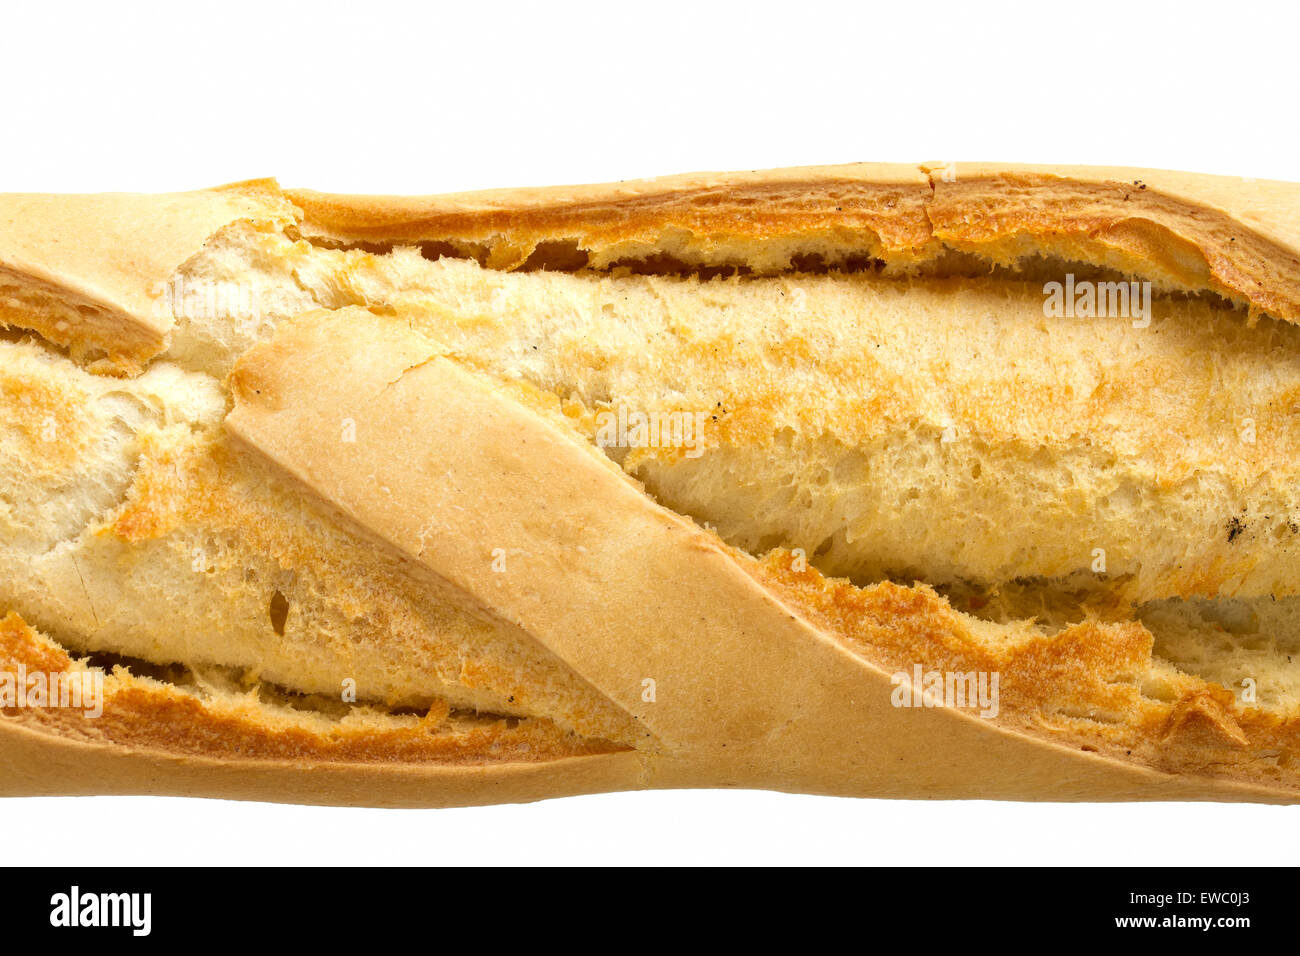 Close up image of crusty baguette Stock Photo